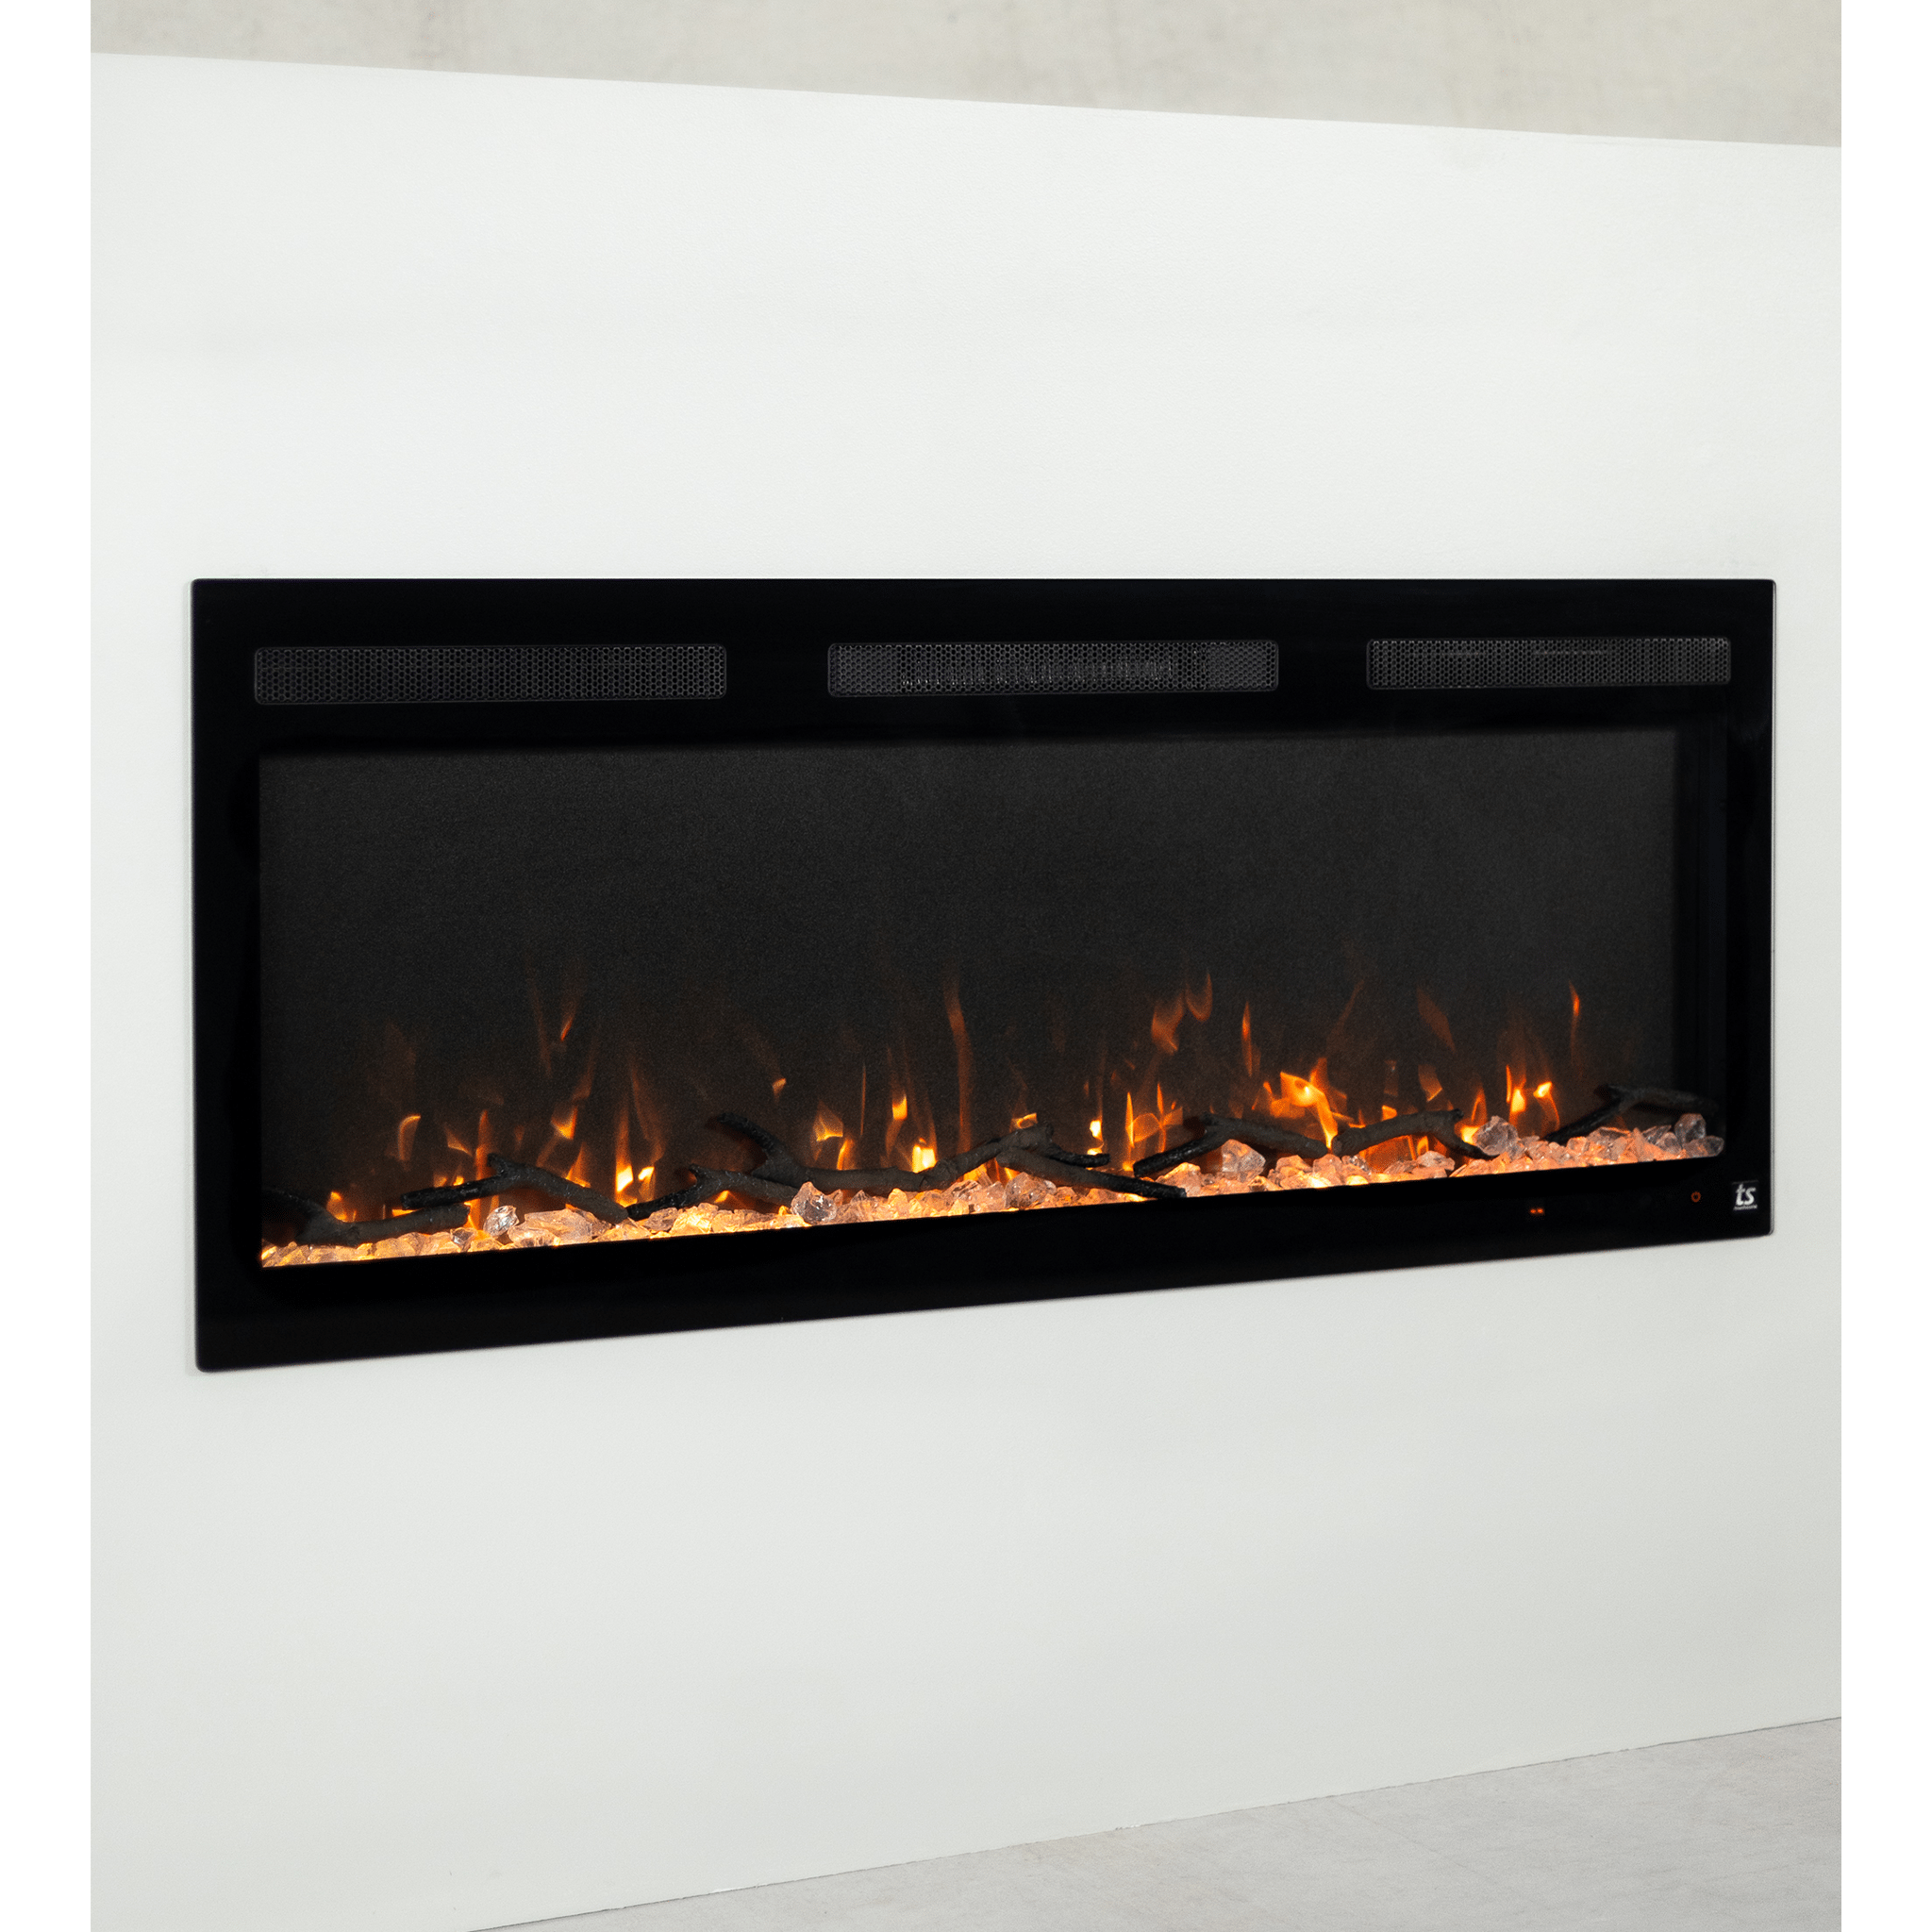 Sideline Fury 57 Inch Electric Fireplace angled